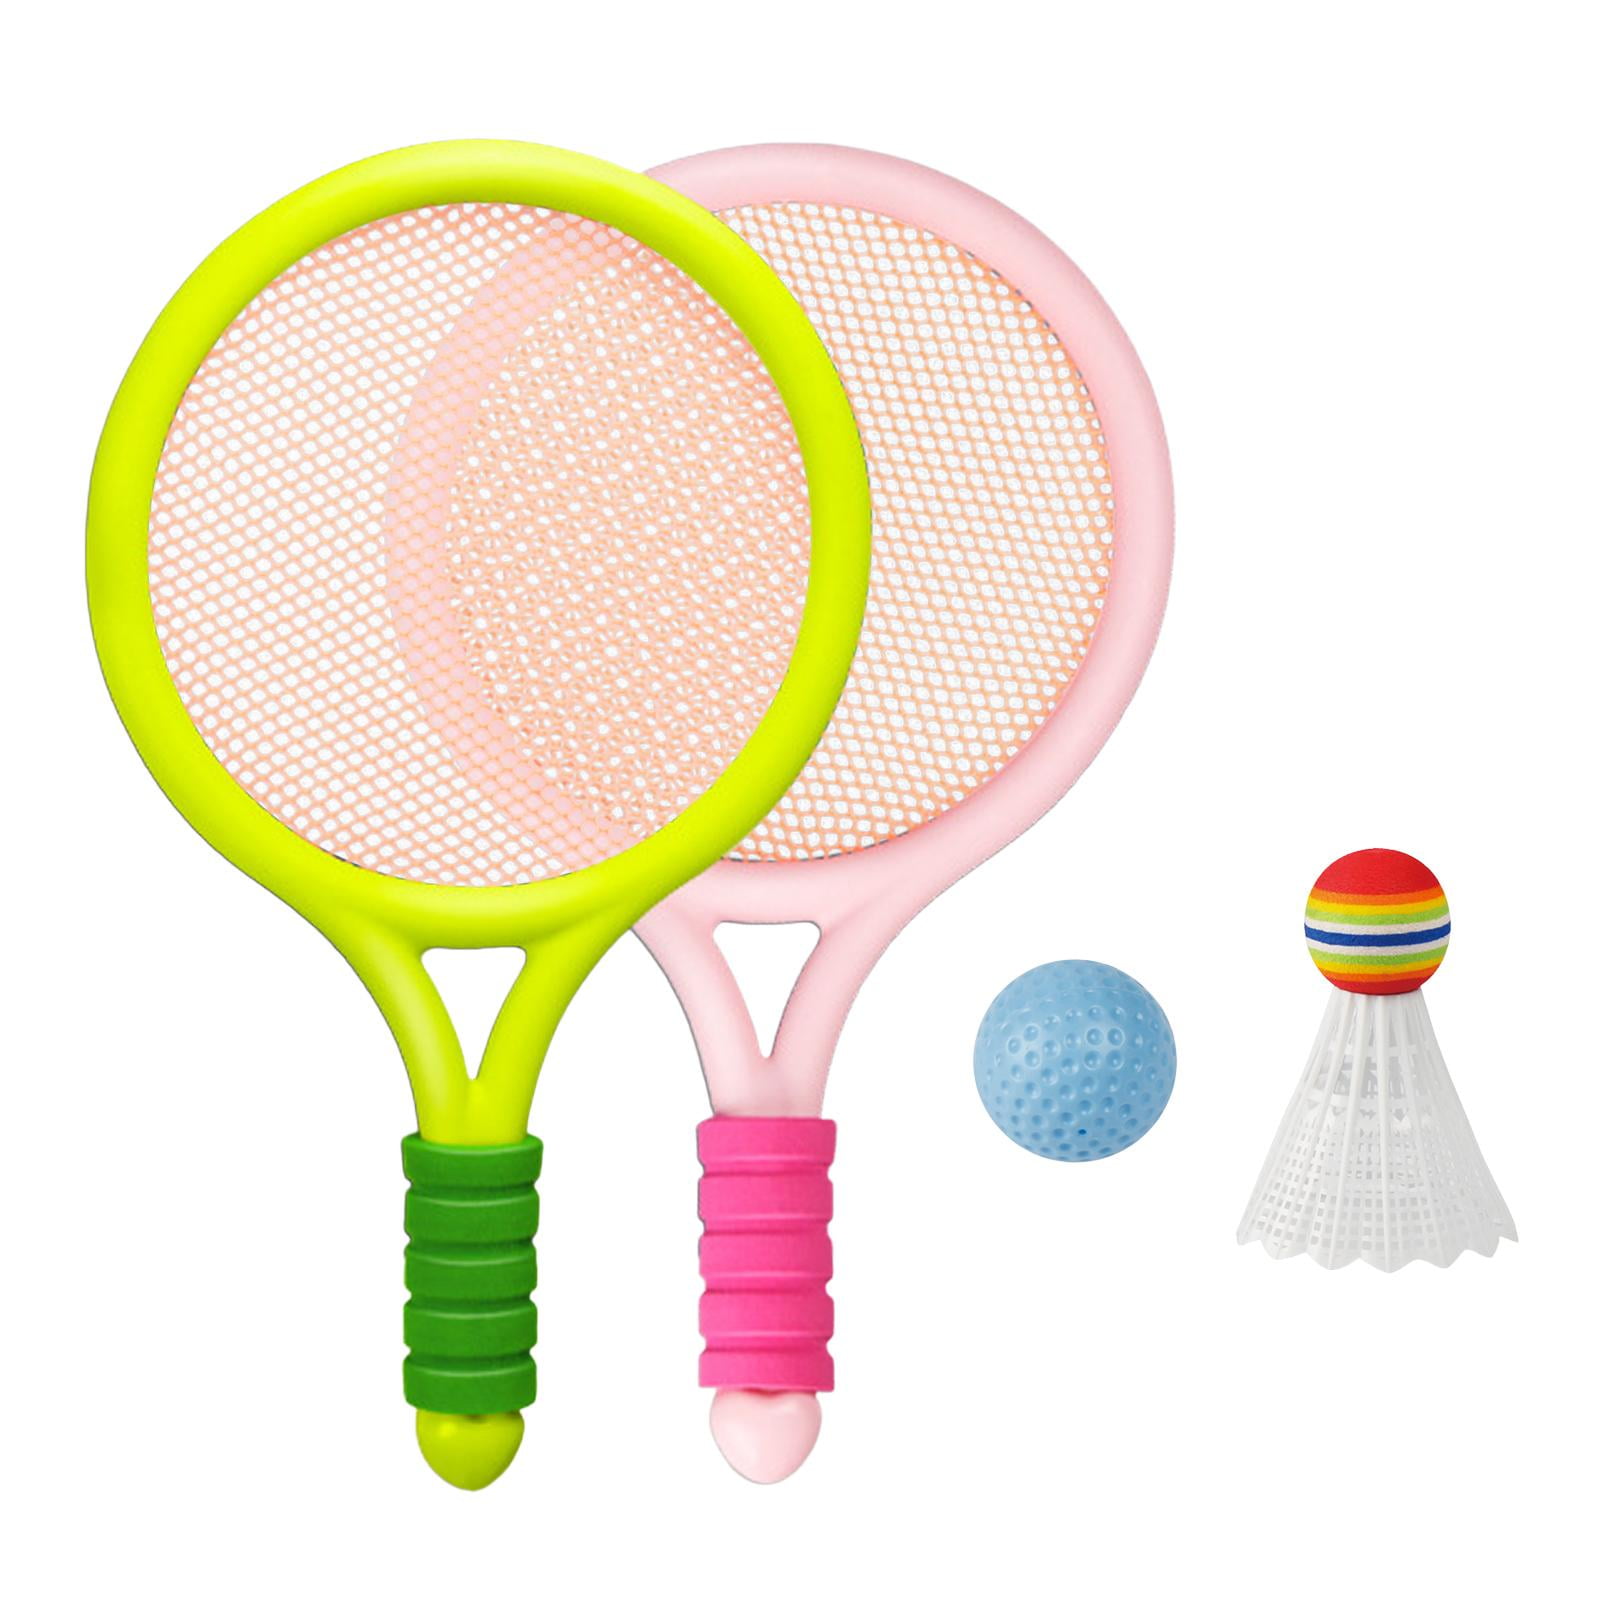 Badminton Tennis Racket with Tennis Ball And Badminton Shuttlecock for Training Beginner Players , Green and Pink